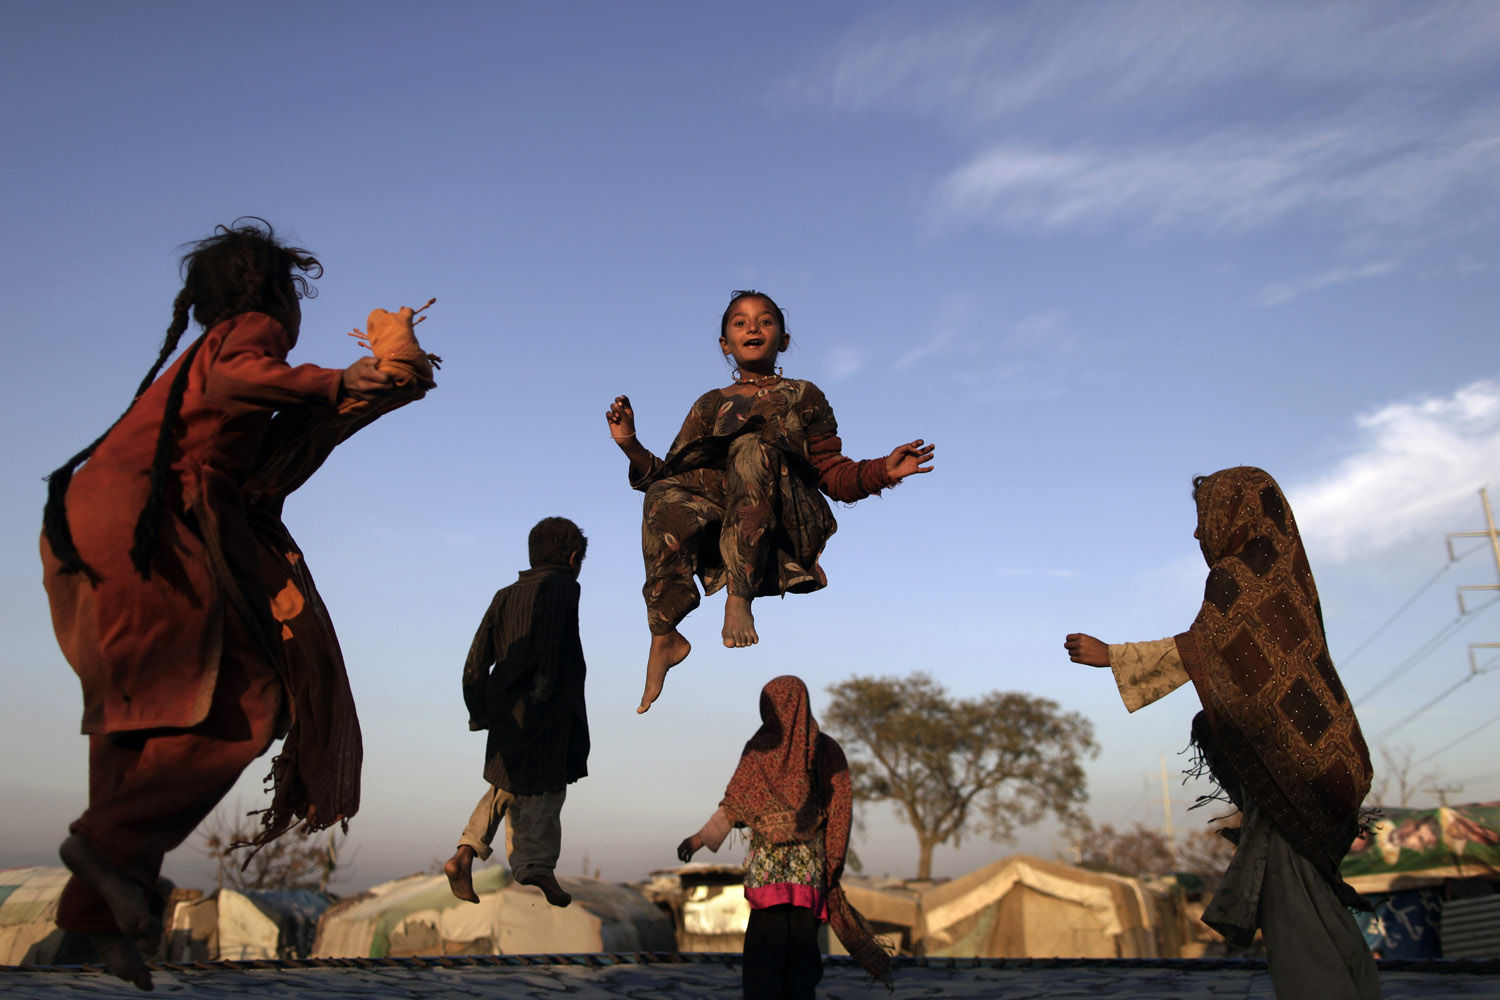 Feb. 8, 2013. Pakistani children, who were displaced with their families by 2010 floods from a village in Pakistan's Sindh province, enjoy jumping on a trampoline in an Islamabad slum.